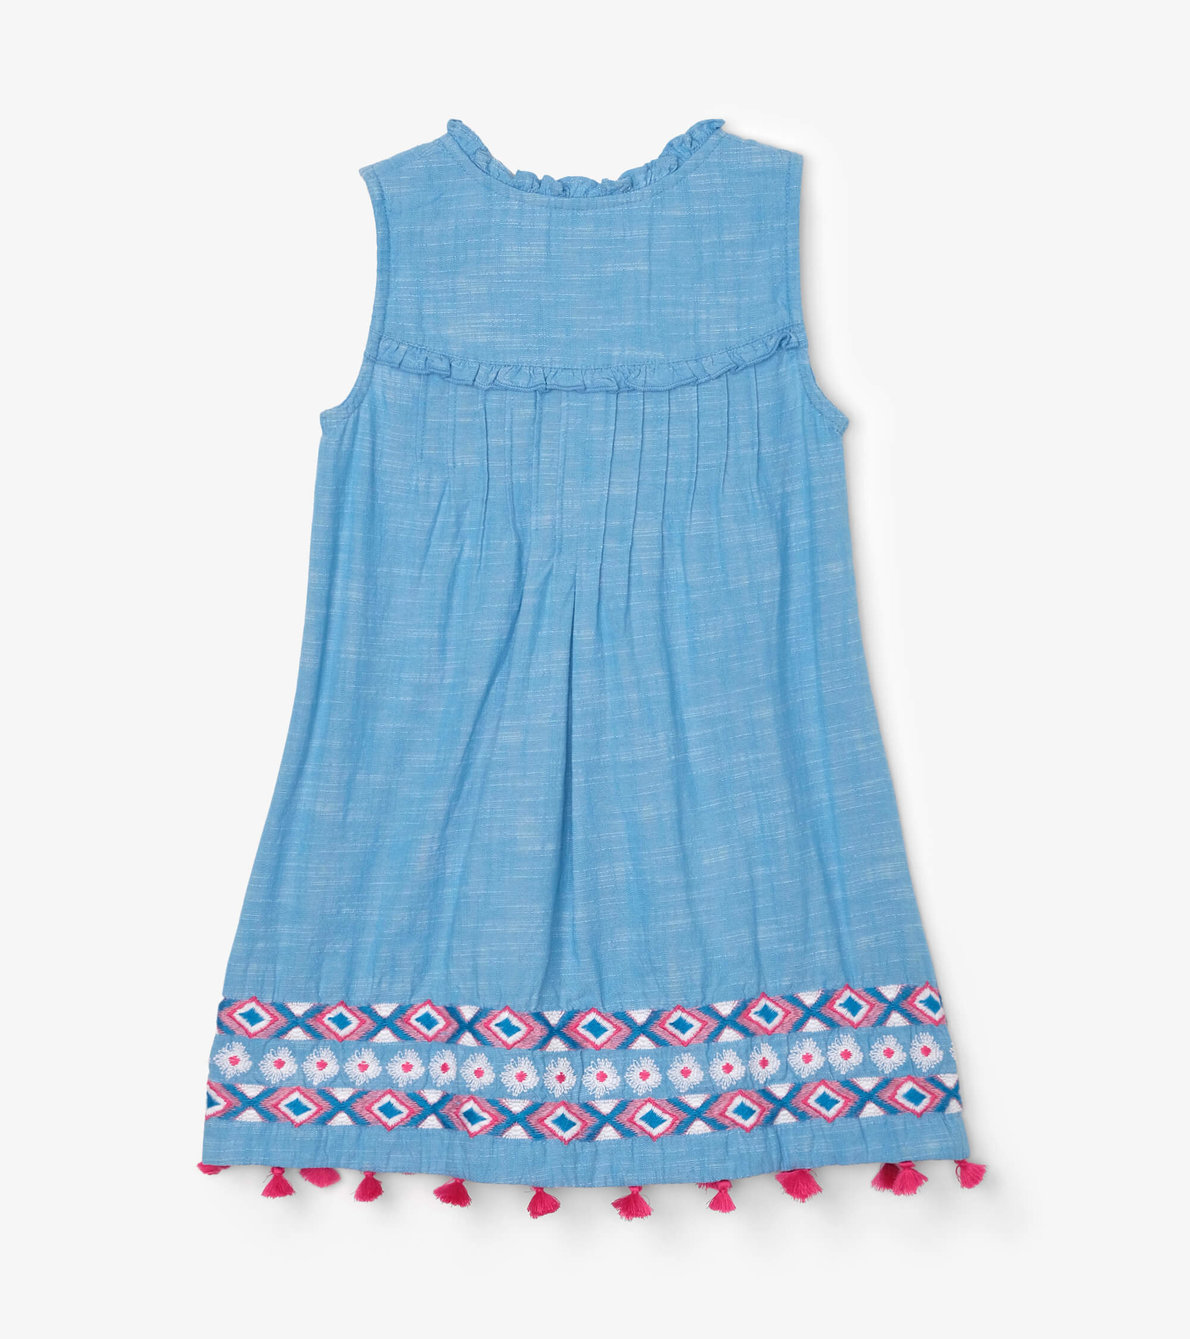 View larger image of Chambray Floral Pin Tuck Dress